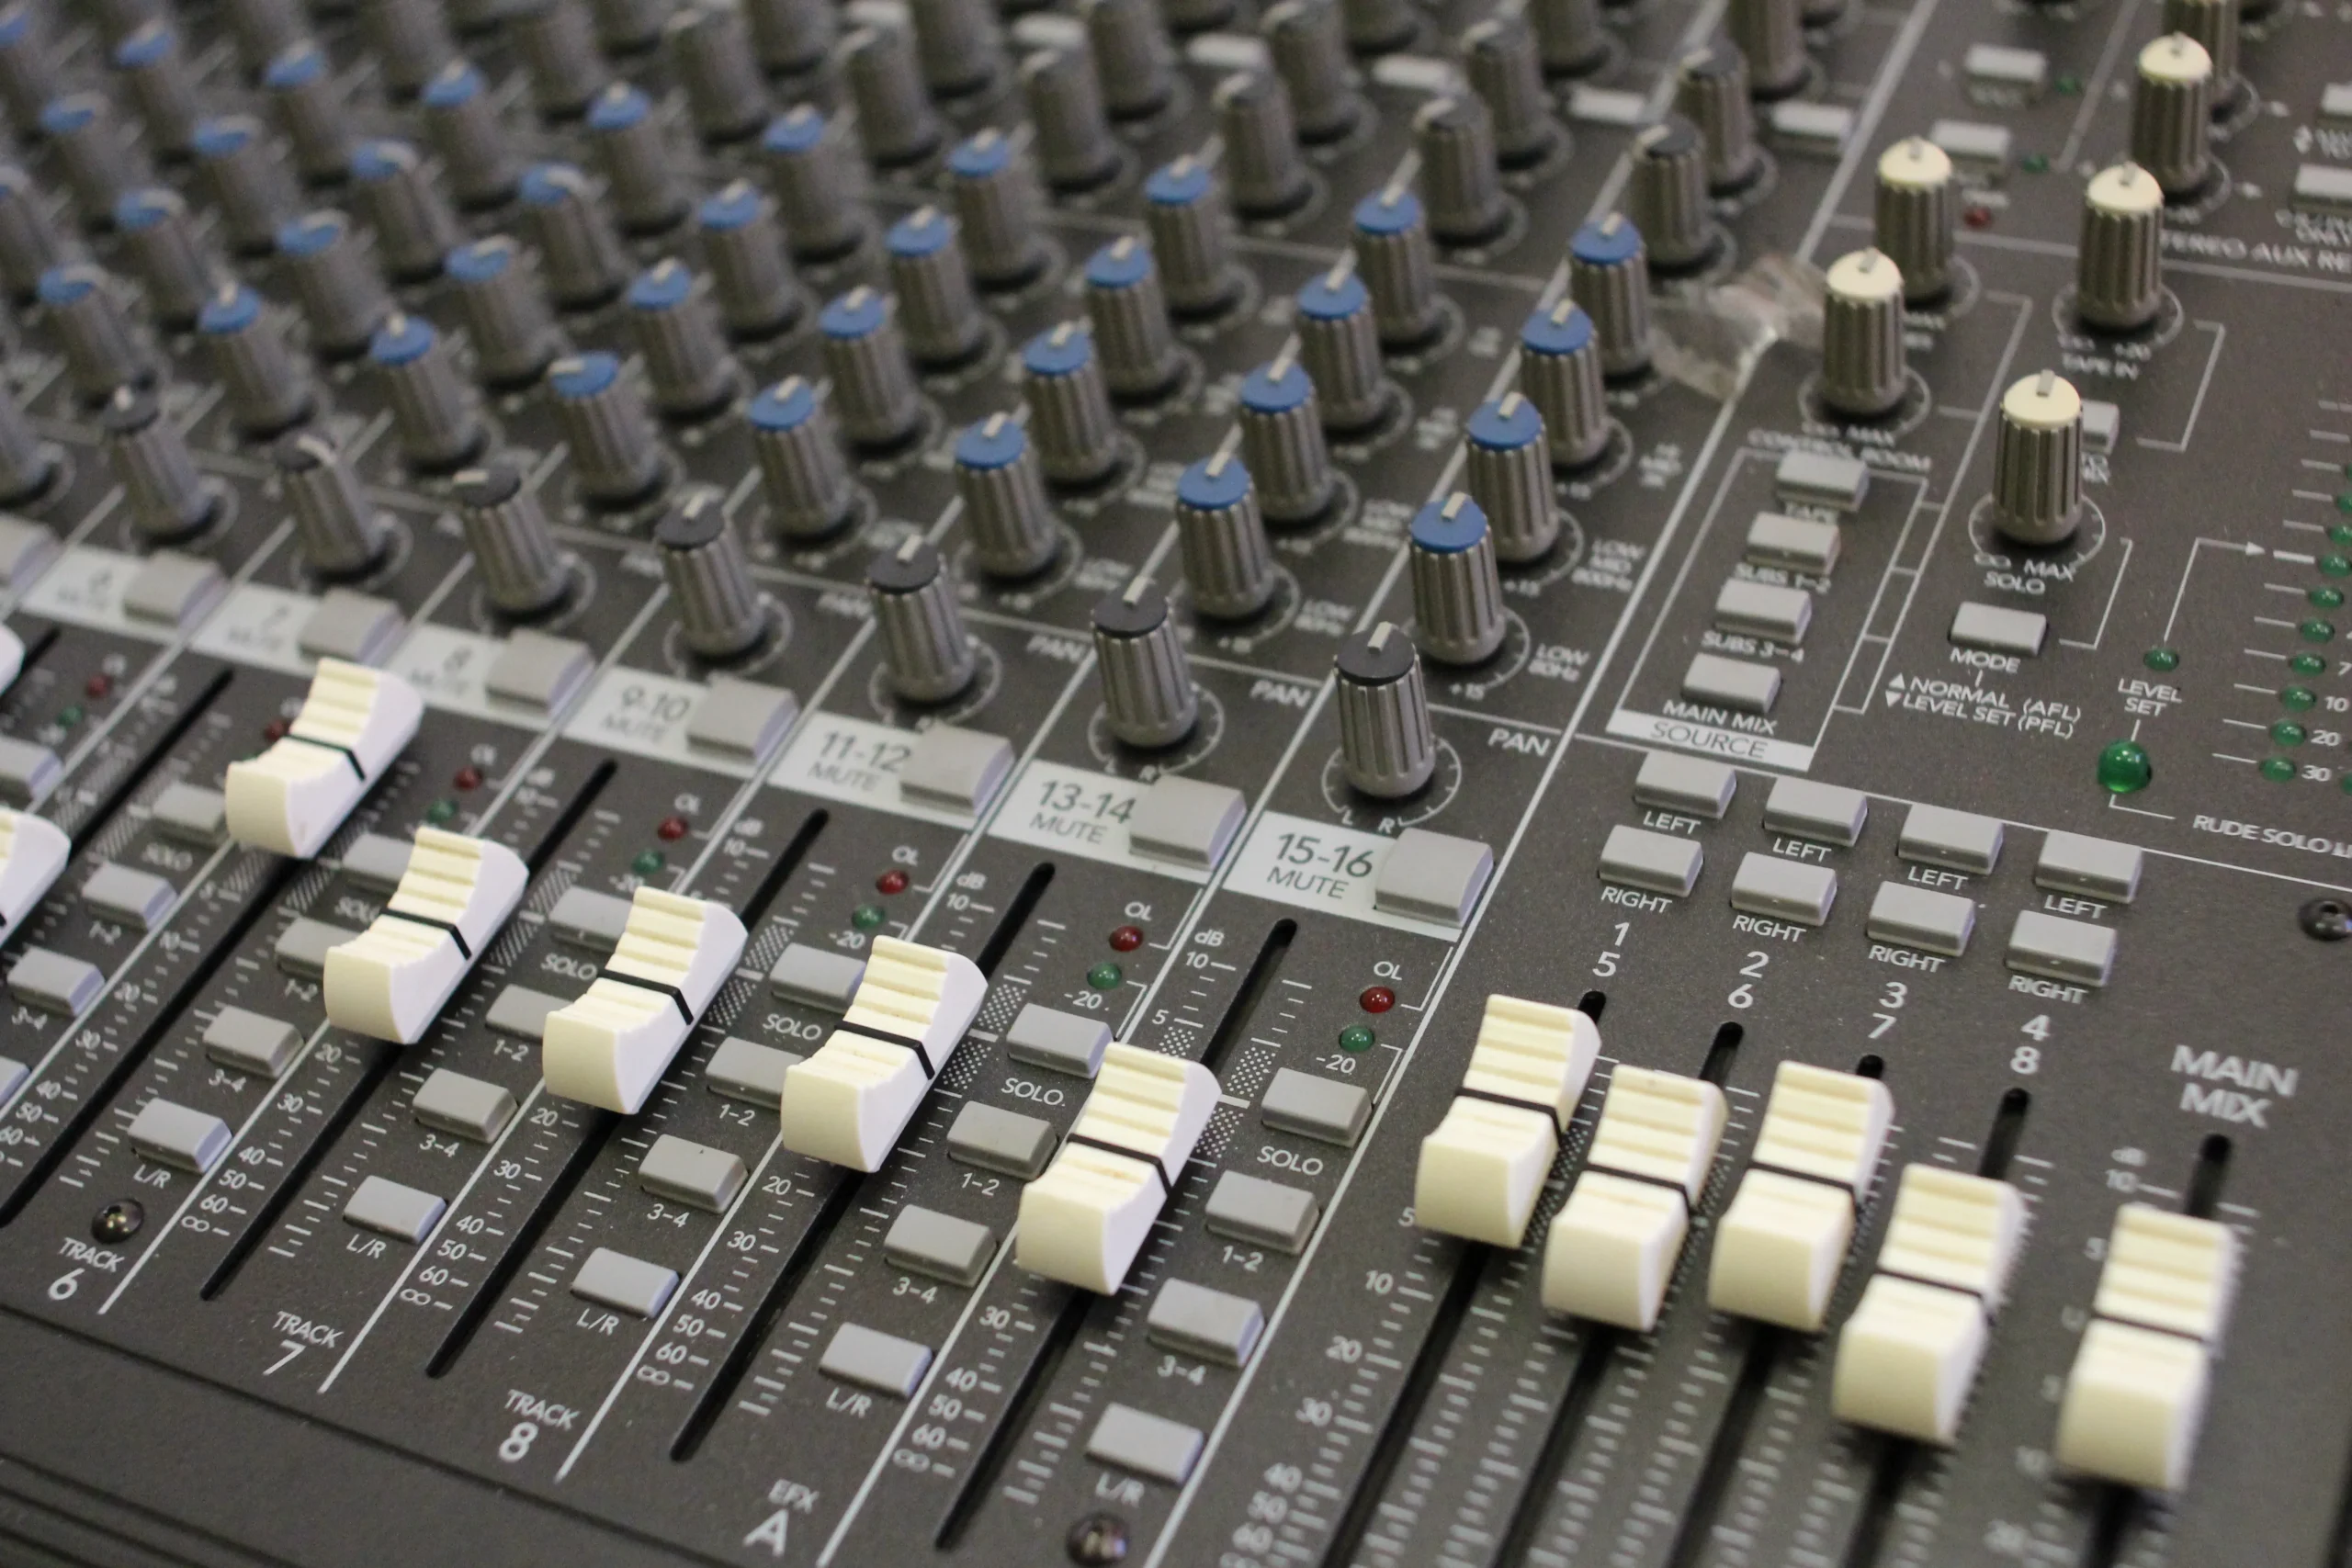 A sound desk with multiple knobs and buttons for adjusting audio levels and settings.